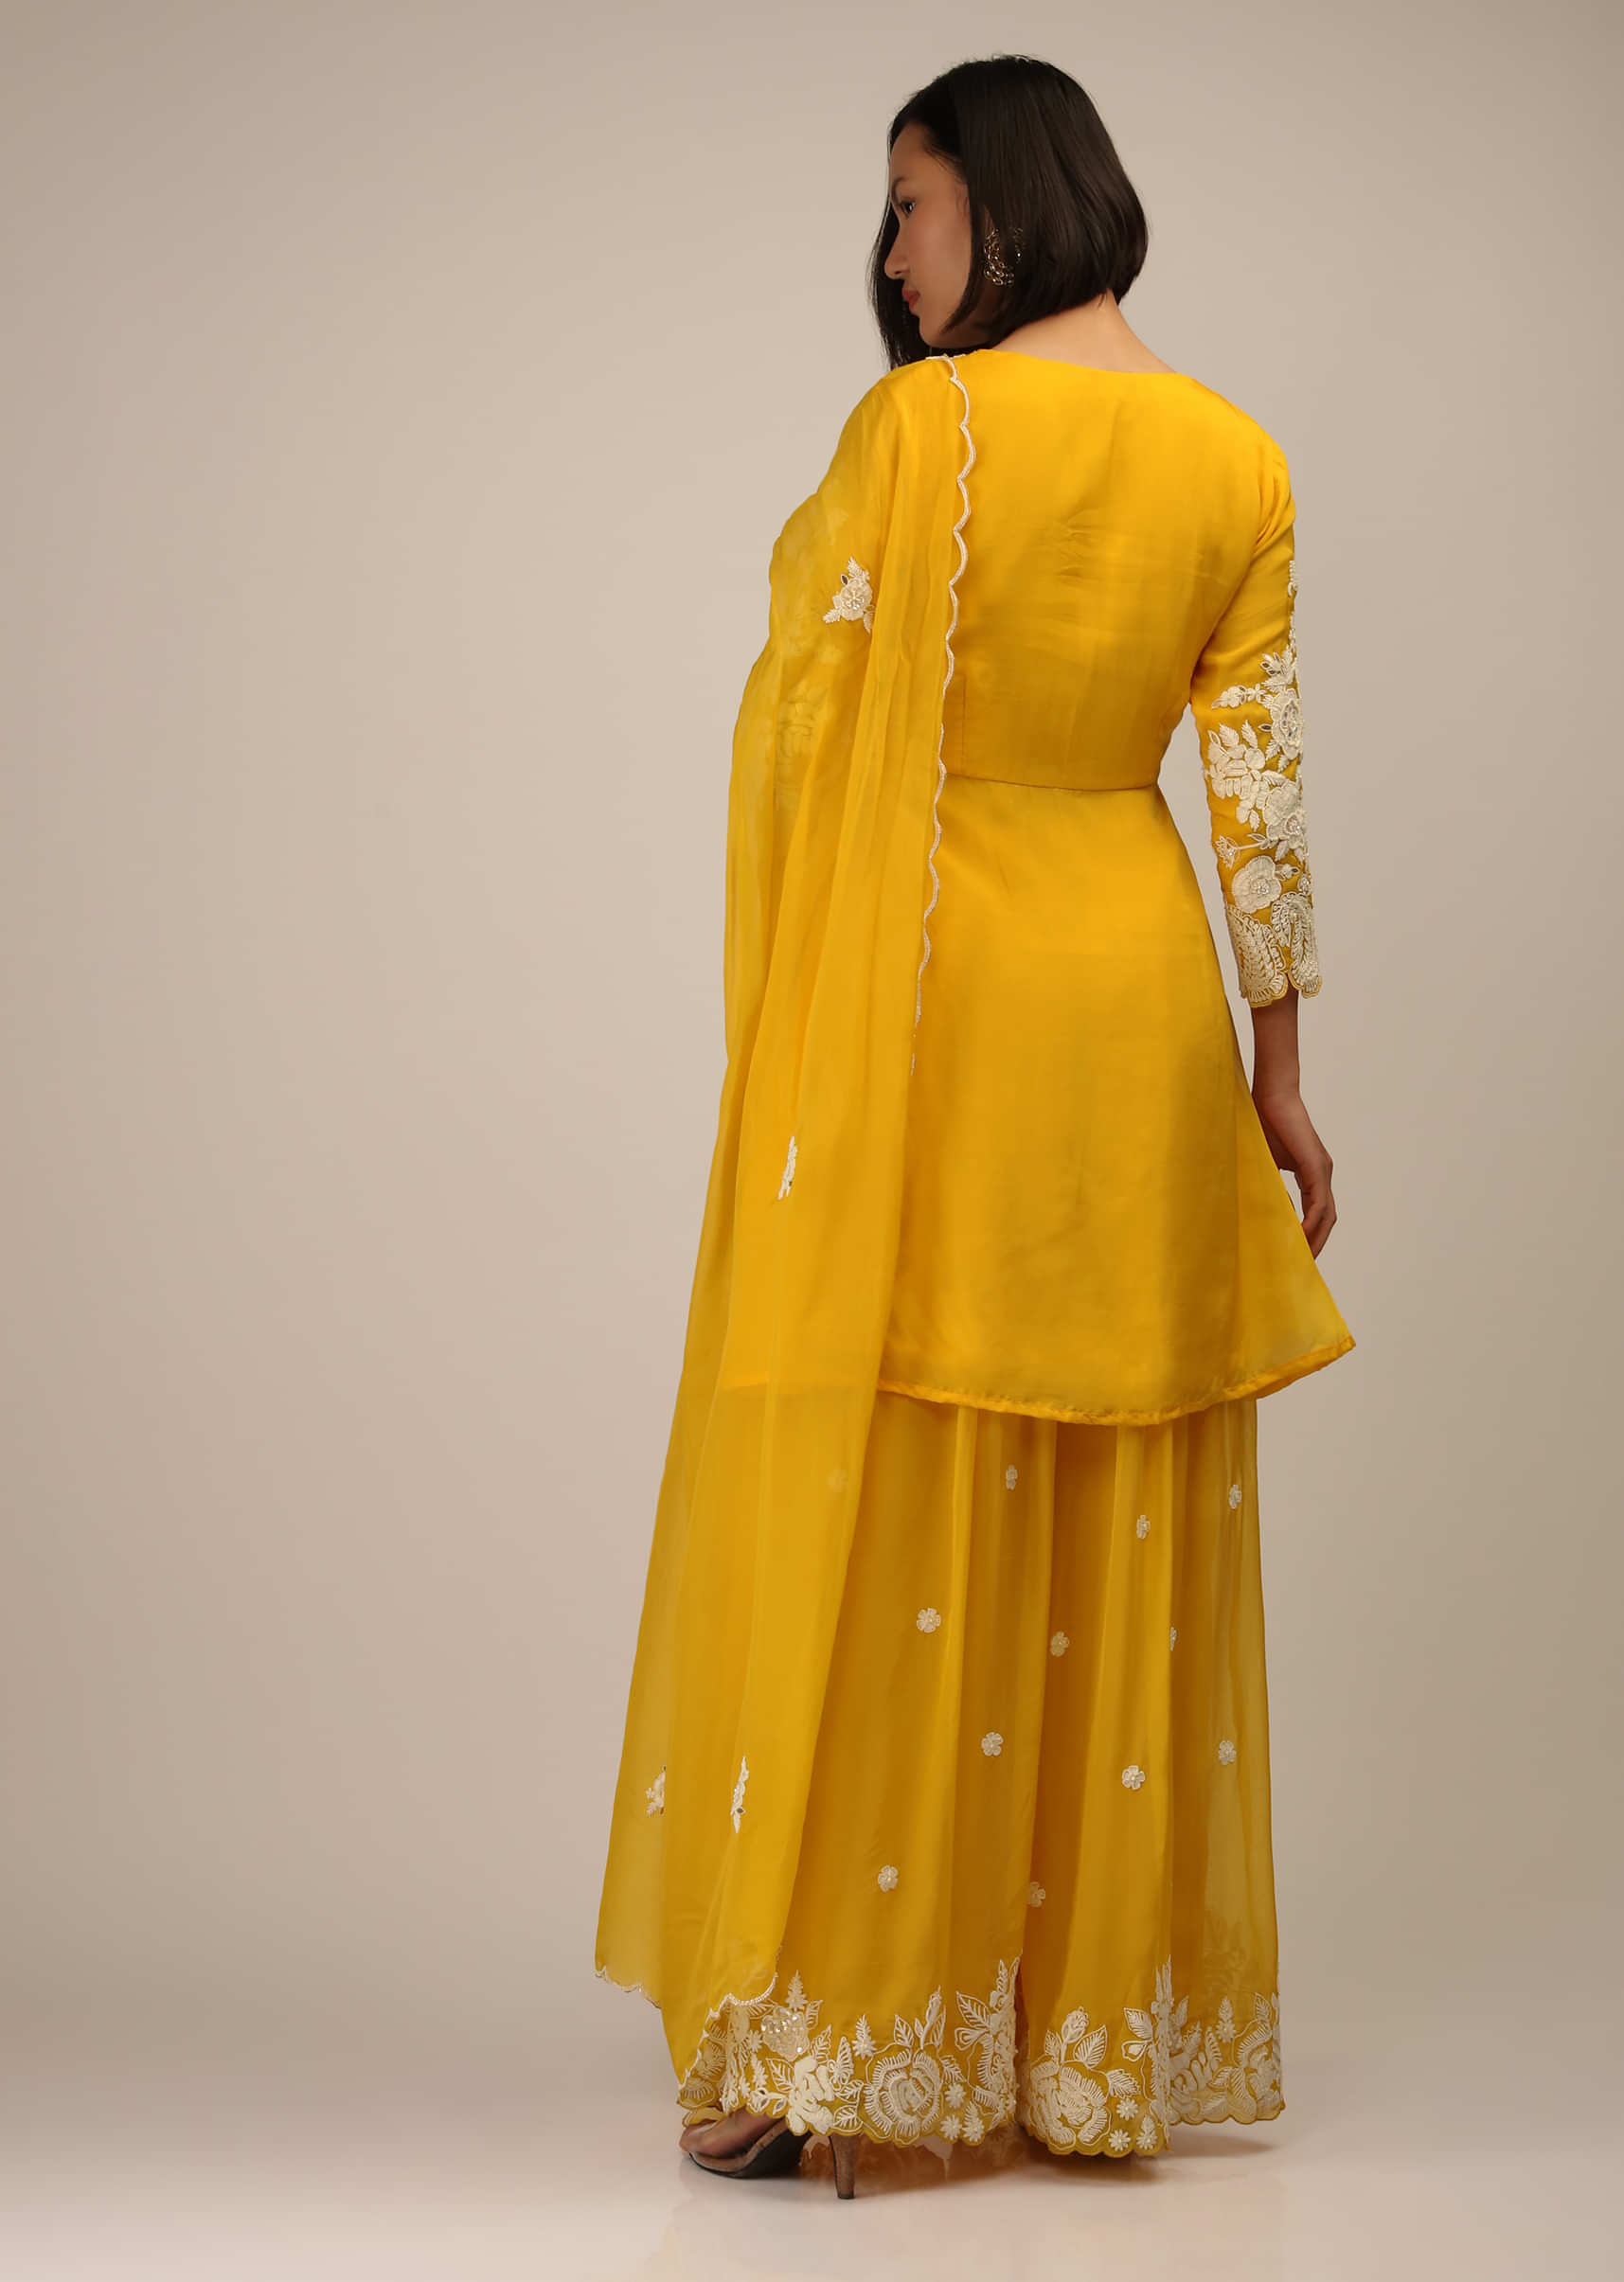 Chrome Yellow A Line Palazzo Suit In Organza Silk With Thread, Moti And Mirror Embroidered Floral Motifs